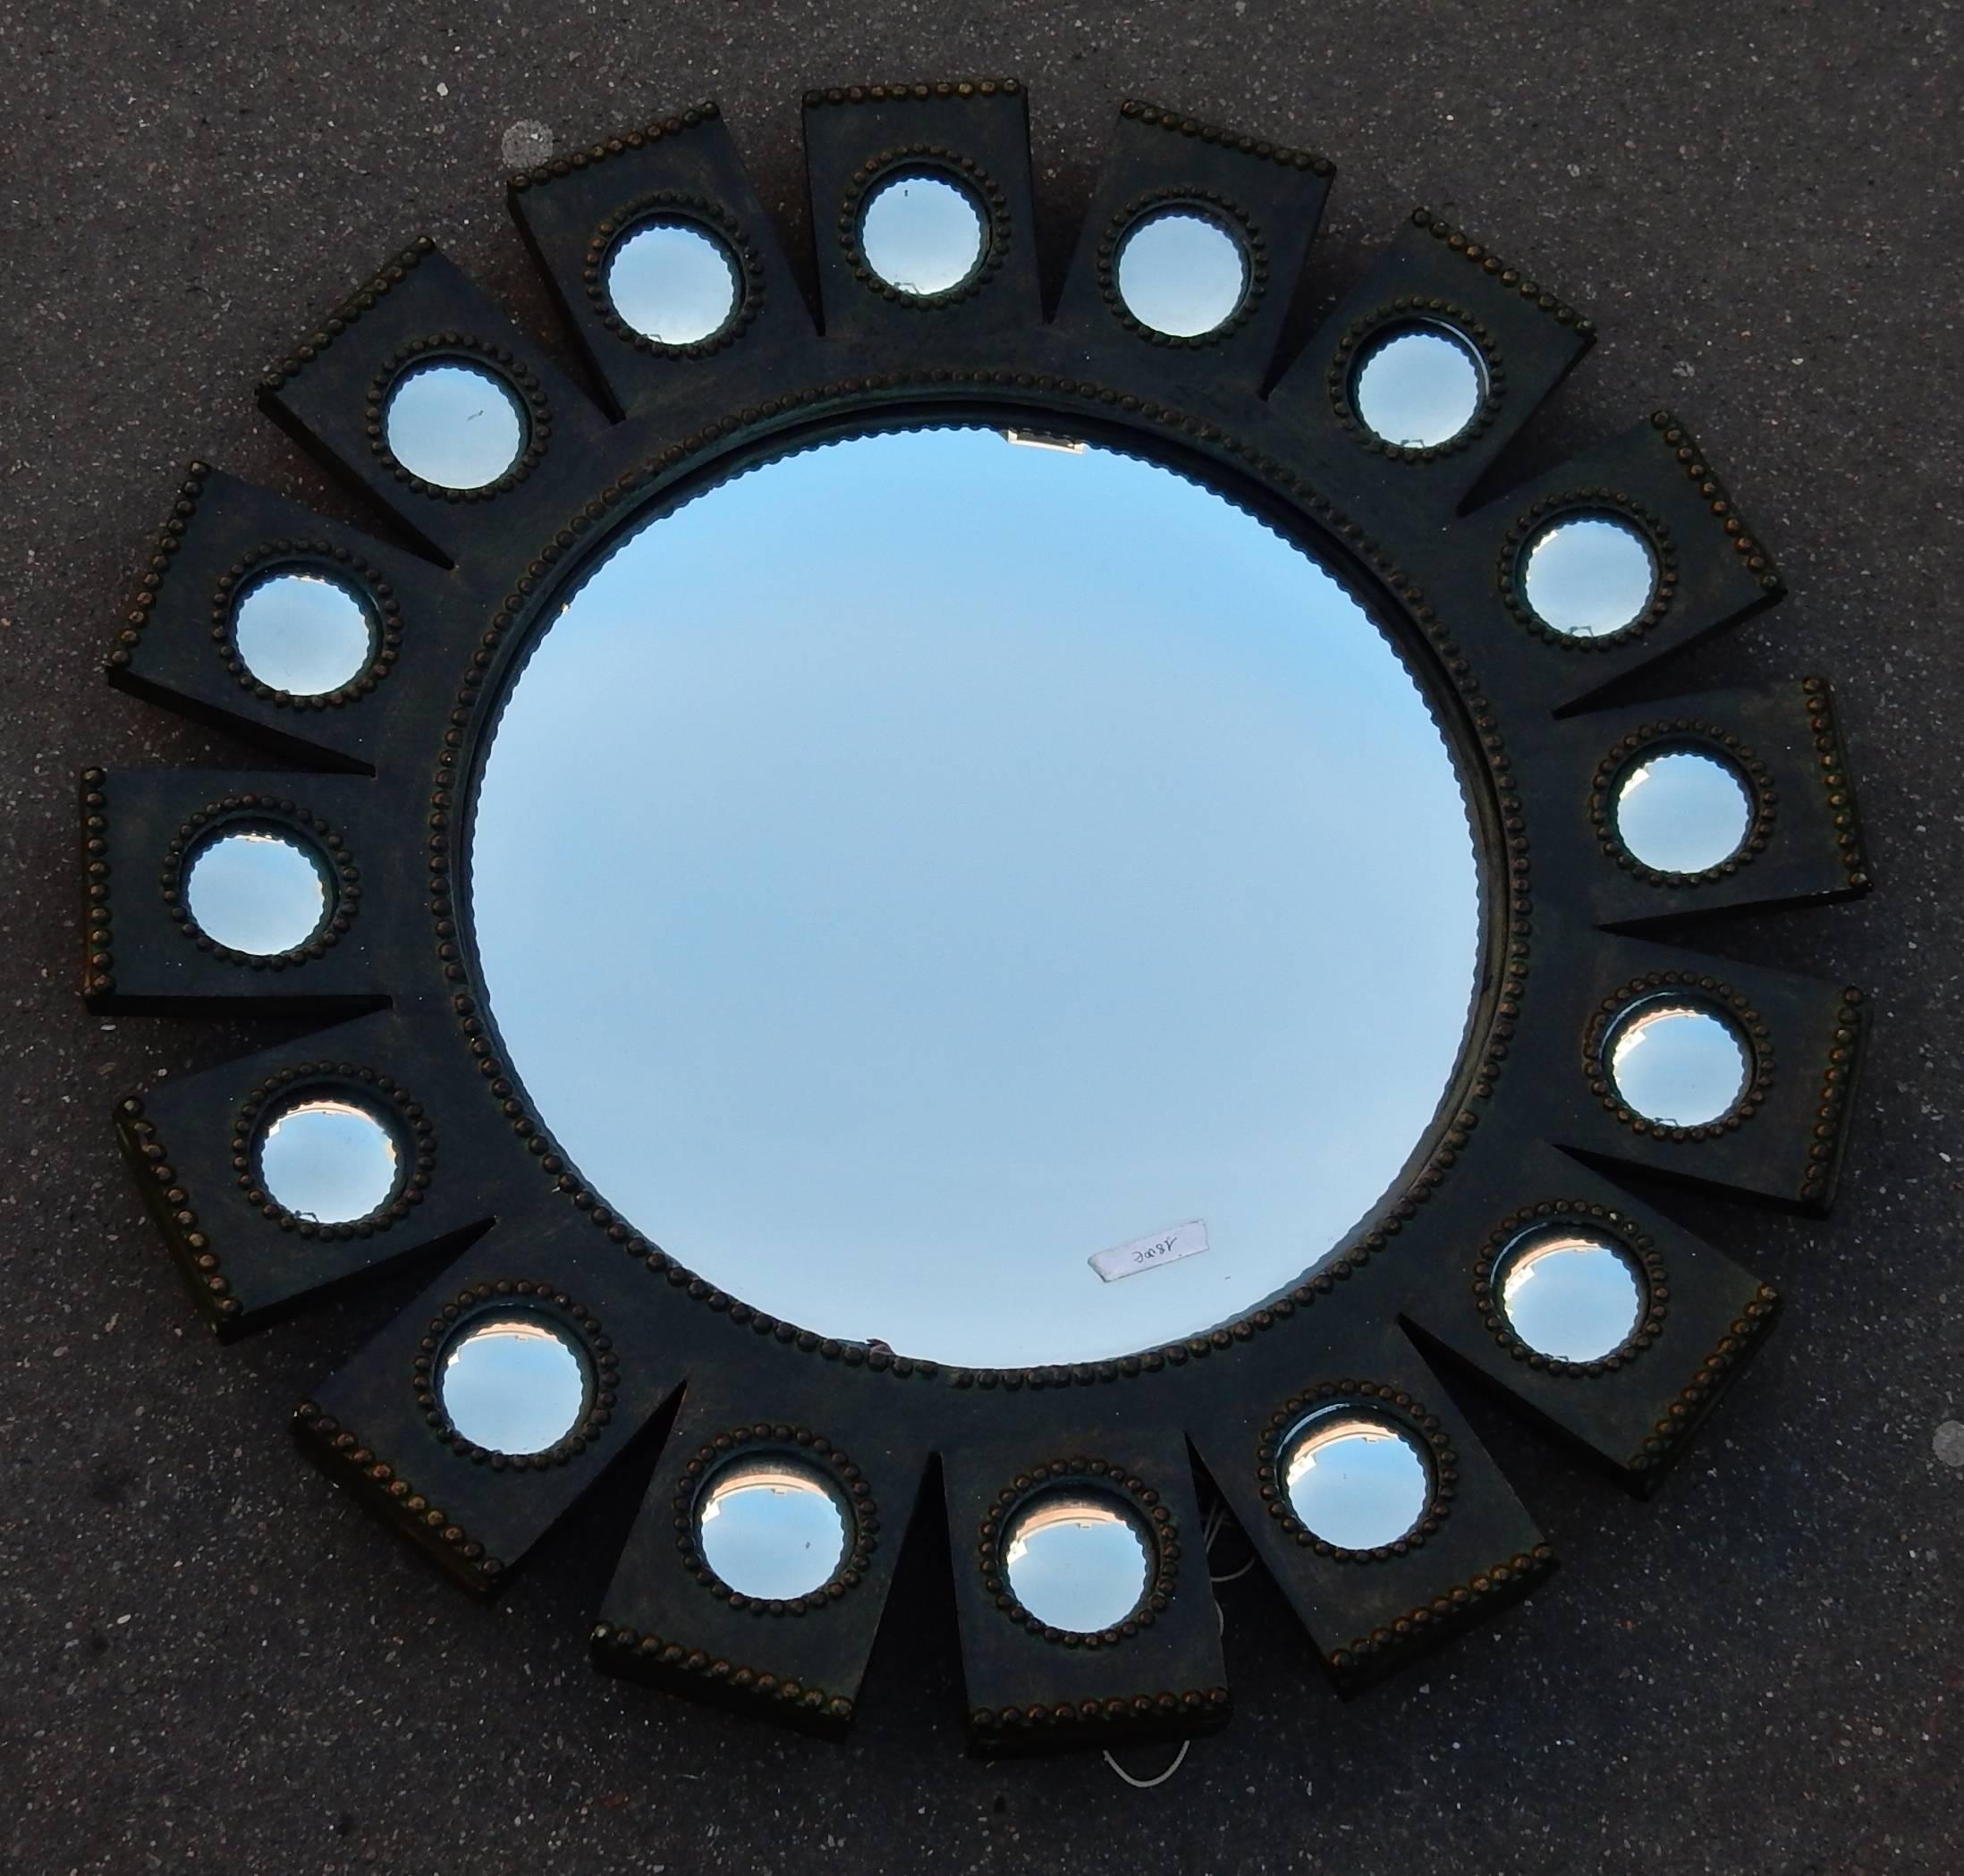 Neoclassical 1970-1980 Convex Mirror with Its 16 Small Convex Mirrors